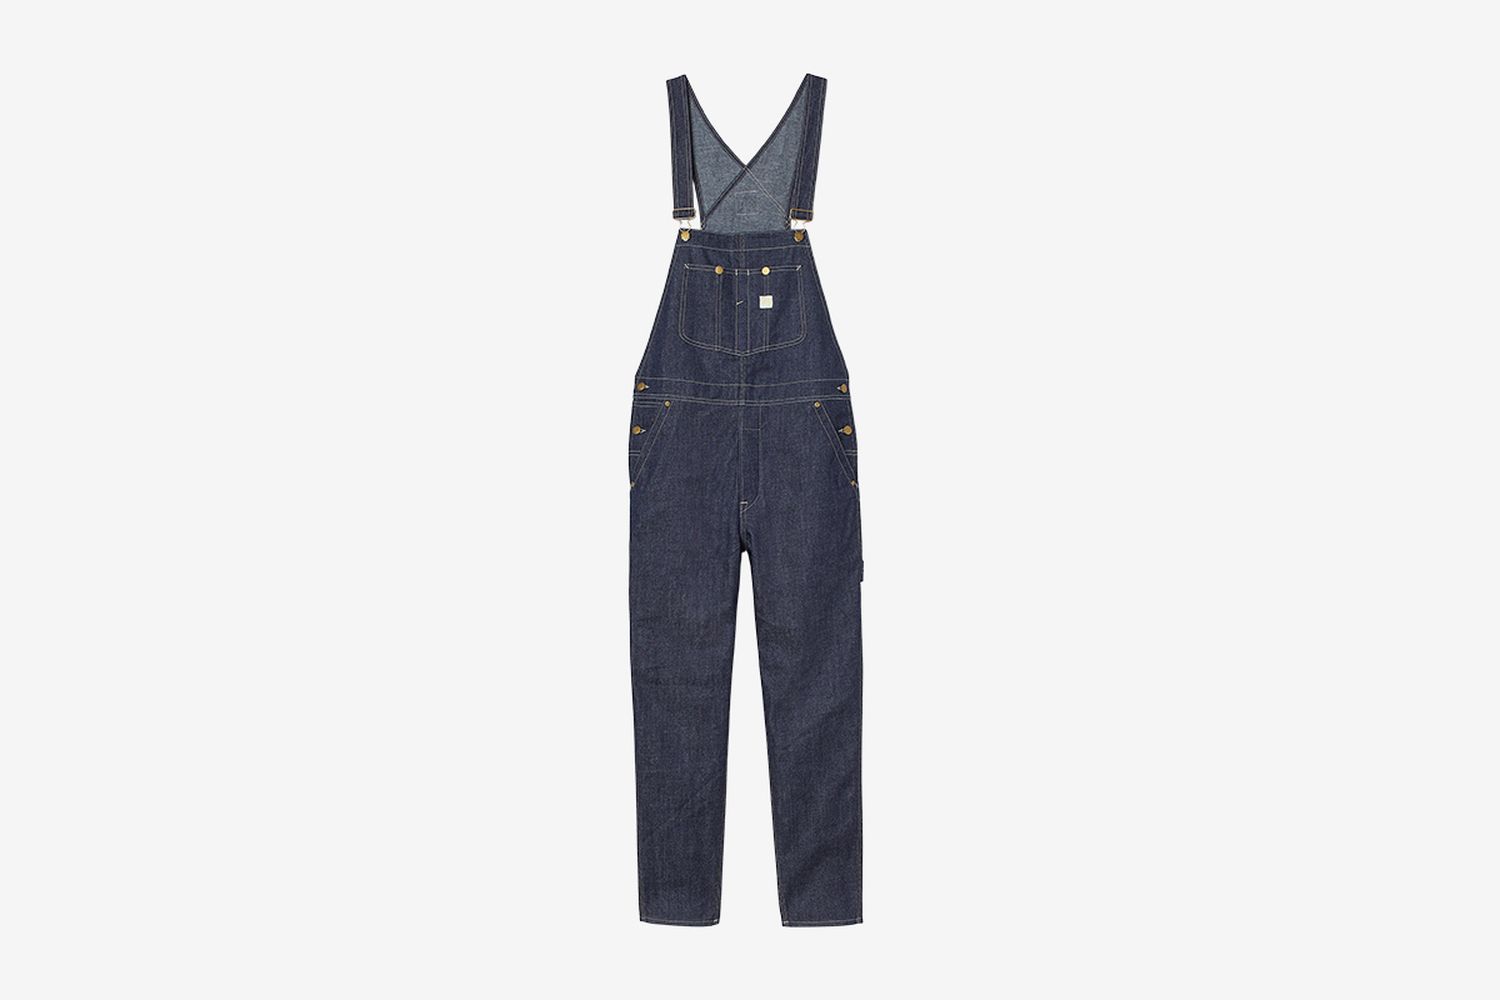 Lee x H&M Dungarees